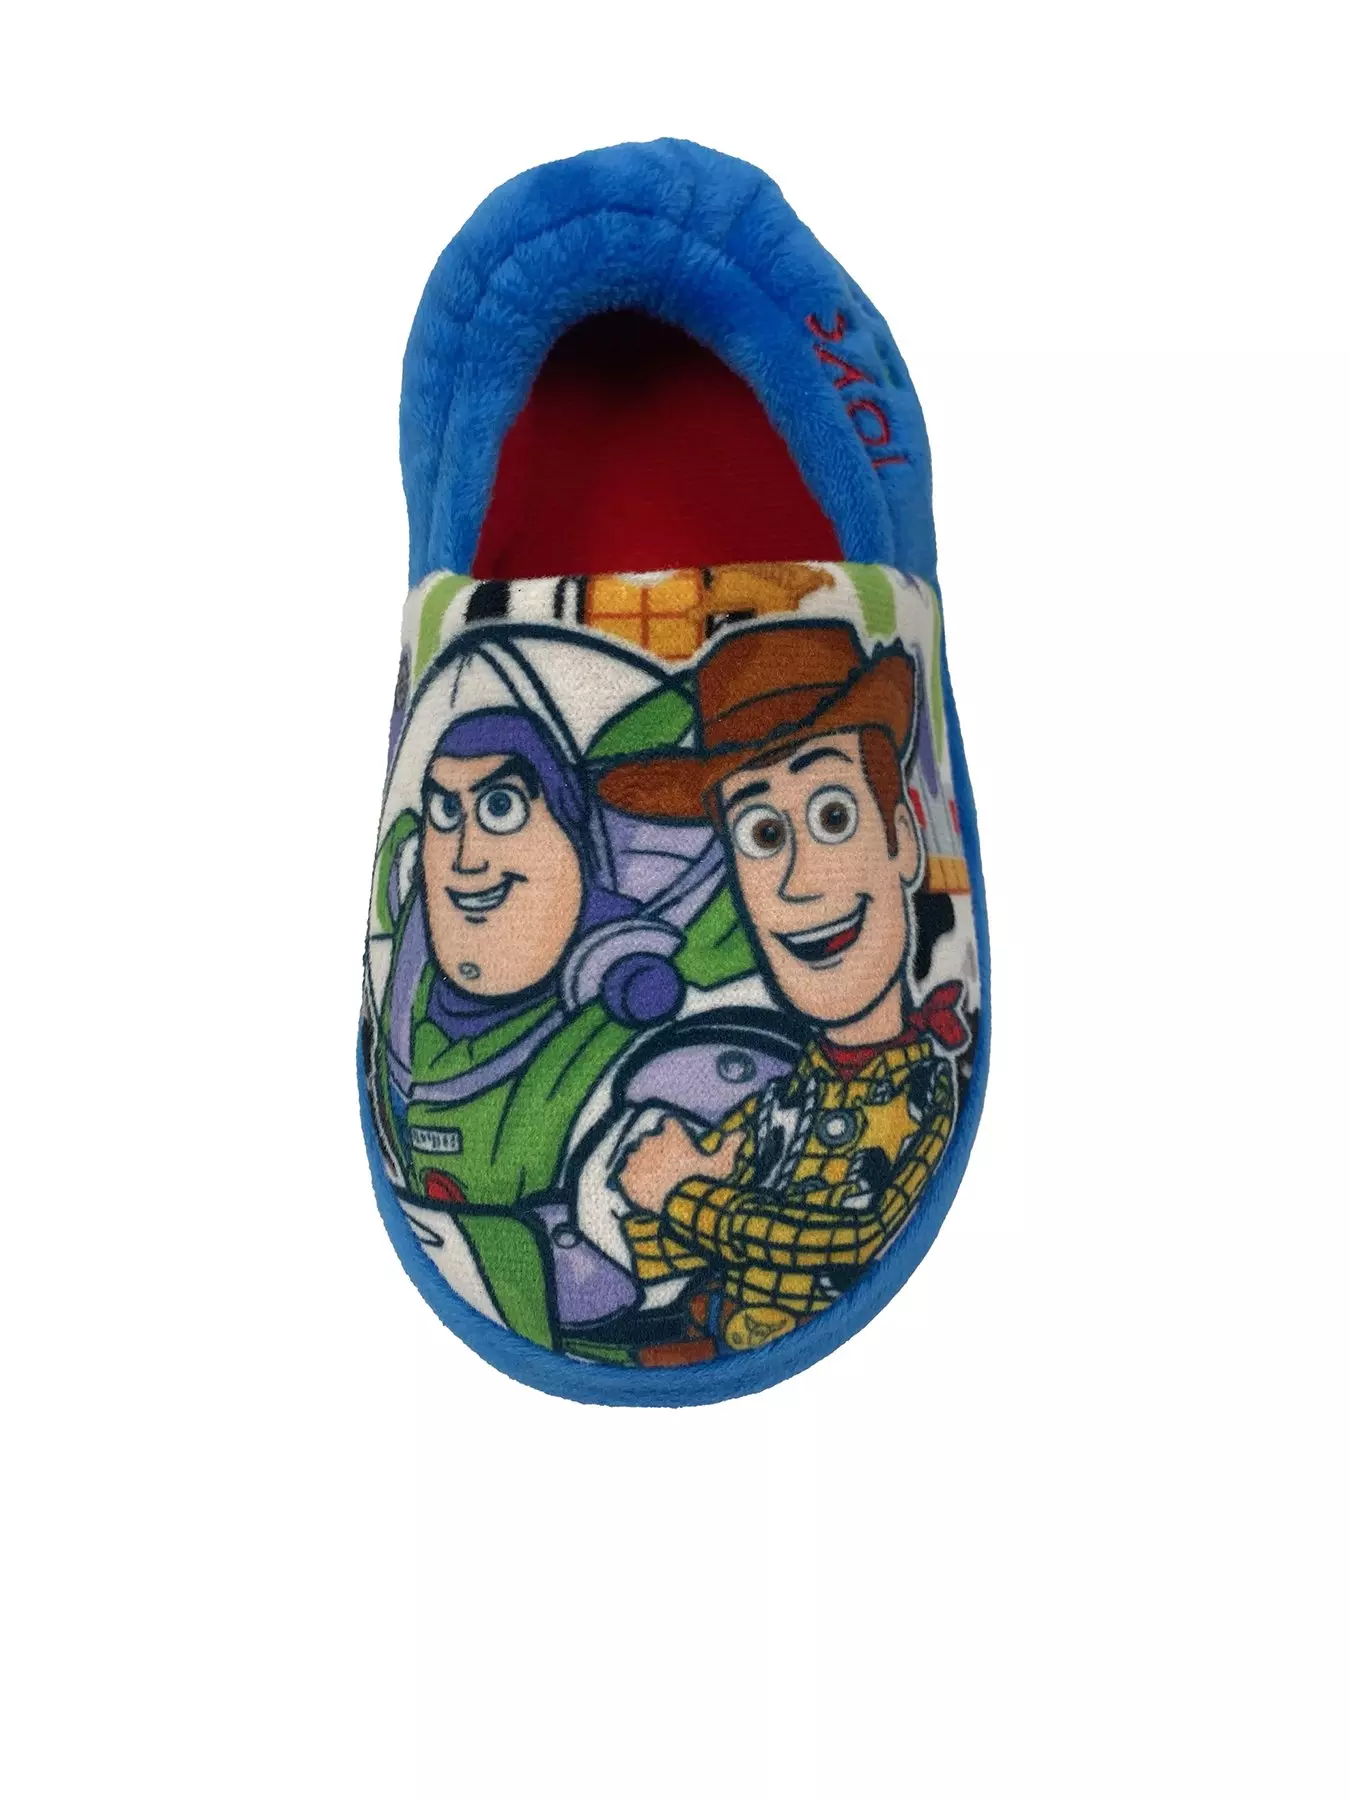 Disney Toy Story Kids Waterproof PVC Rainboots - Featuring Buzz Lightyear, Woody - Easy-On Handles - Toddler and Little Kid